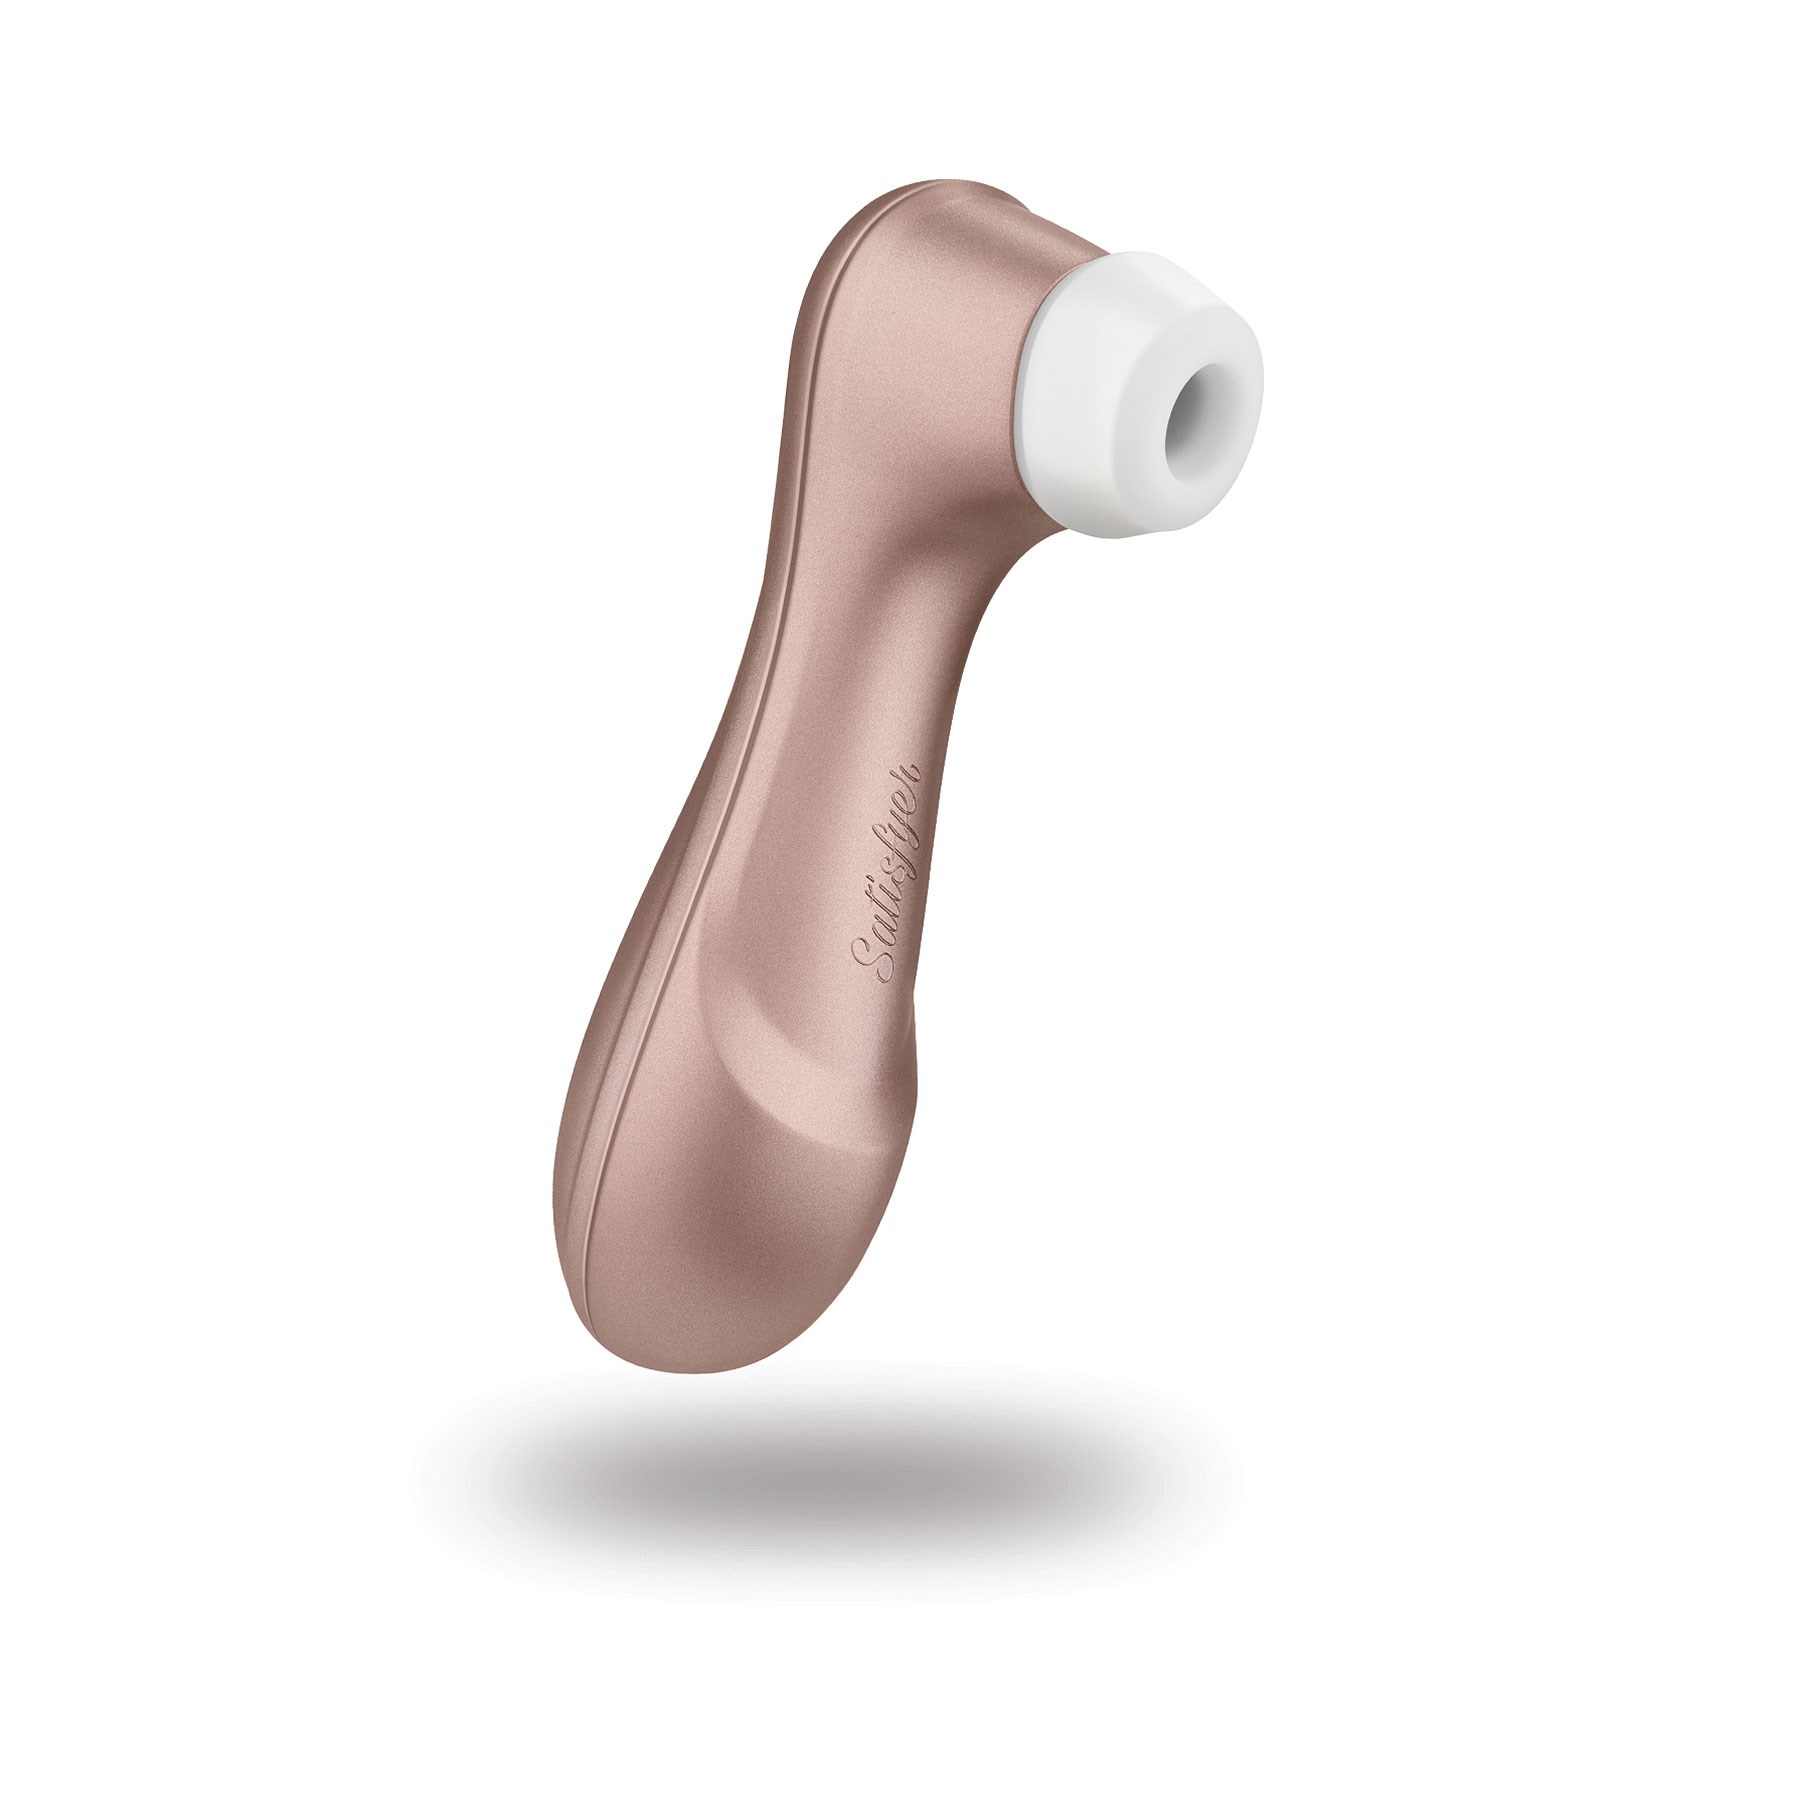 Clitoral Vibrators for Women in Long Beach